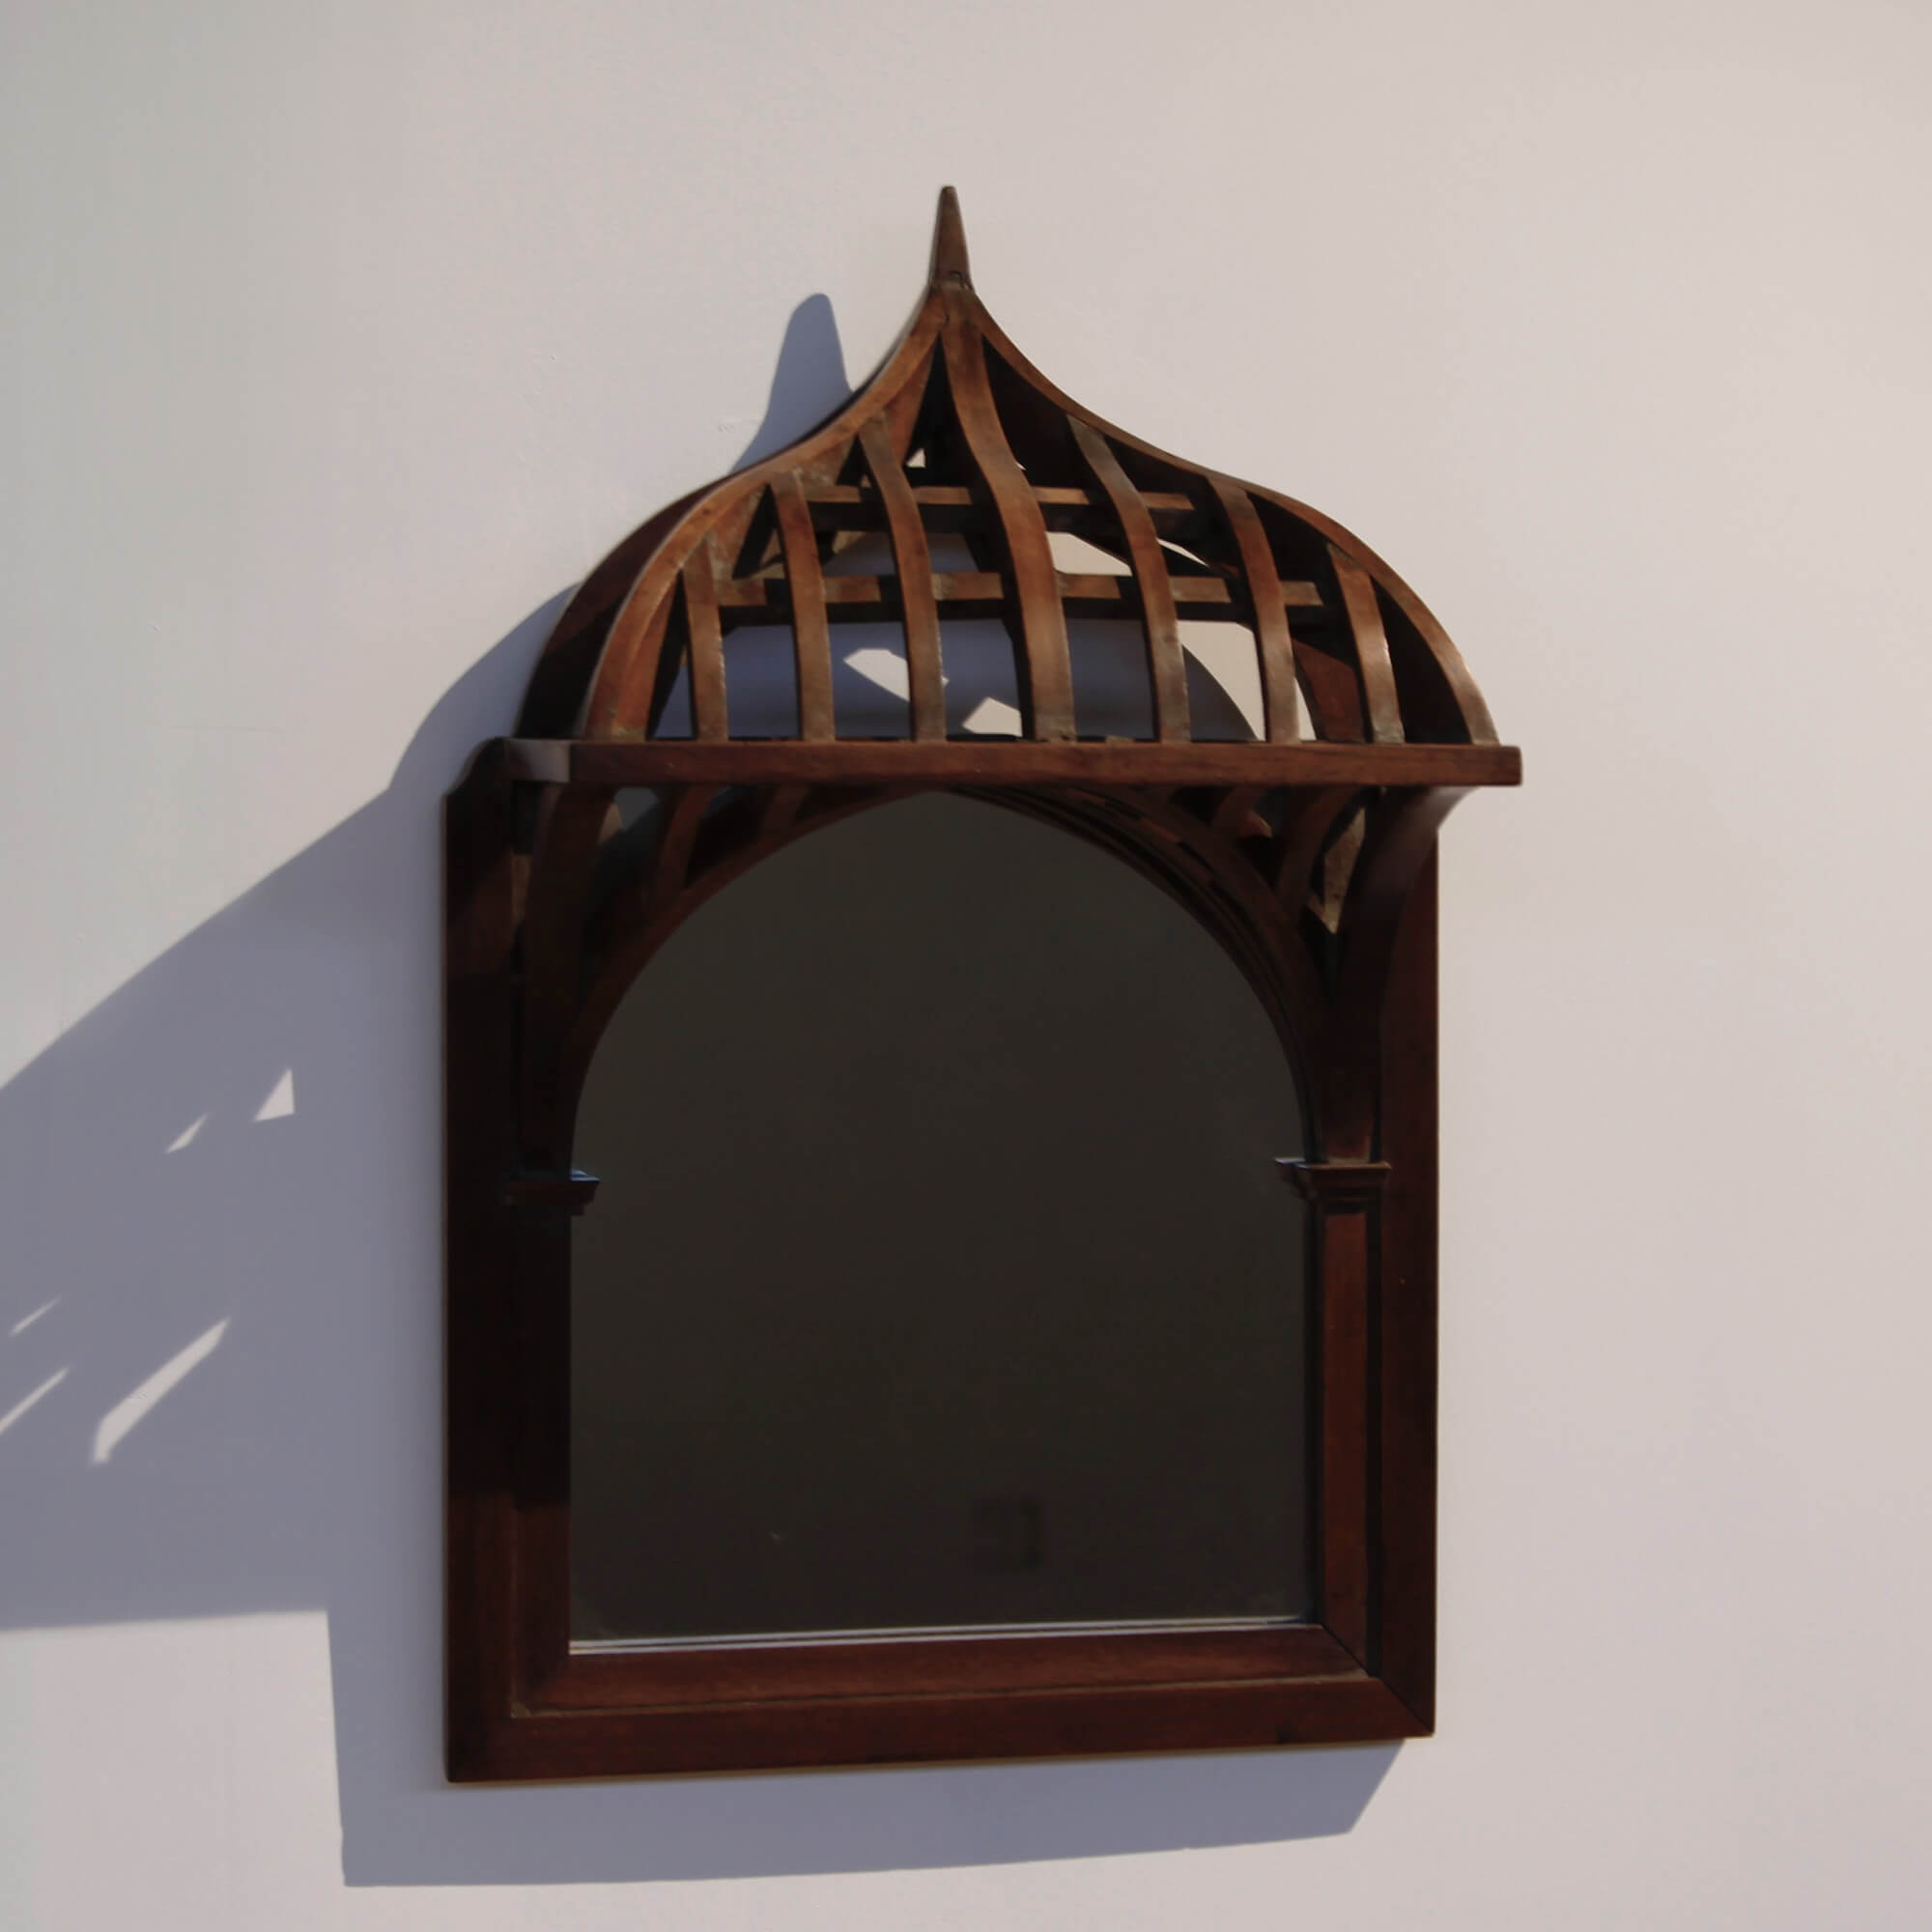 19th century French Architectural Model Mounted on Mirror